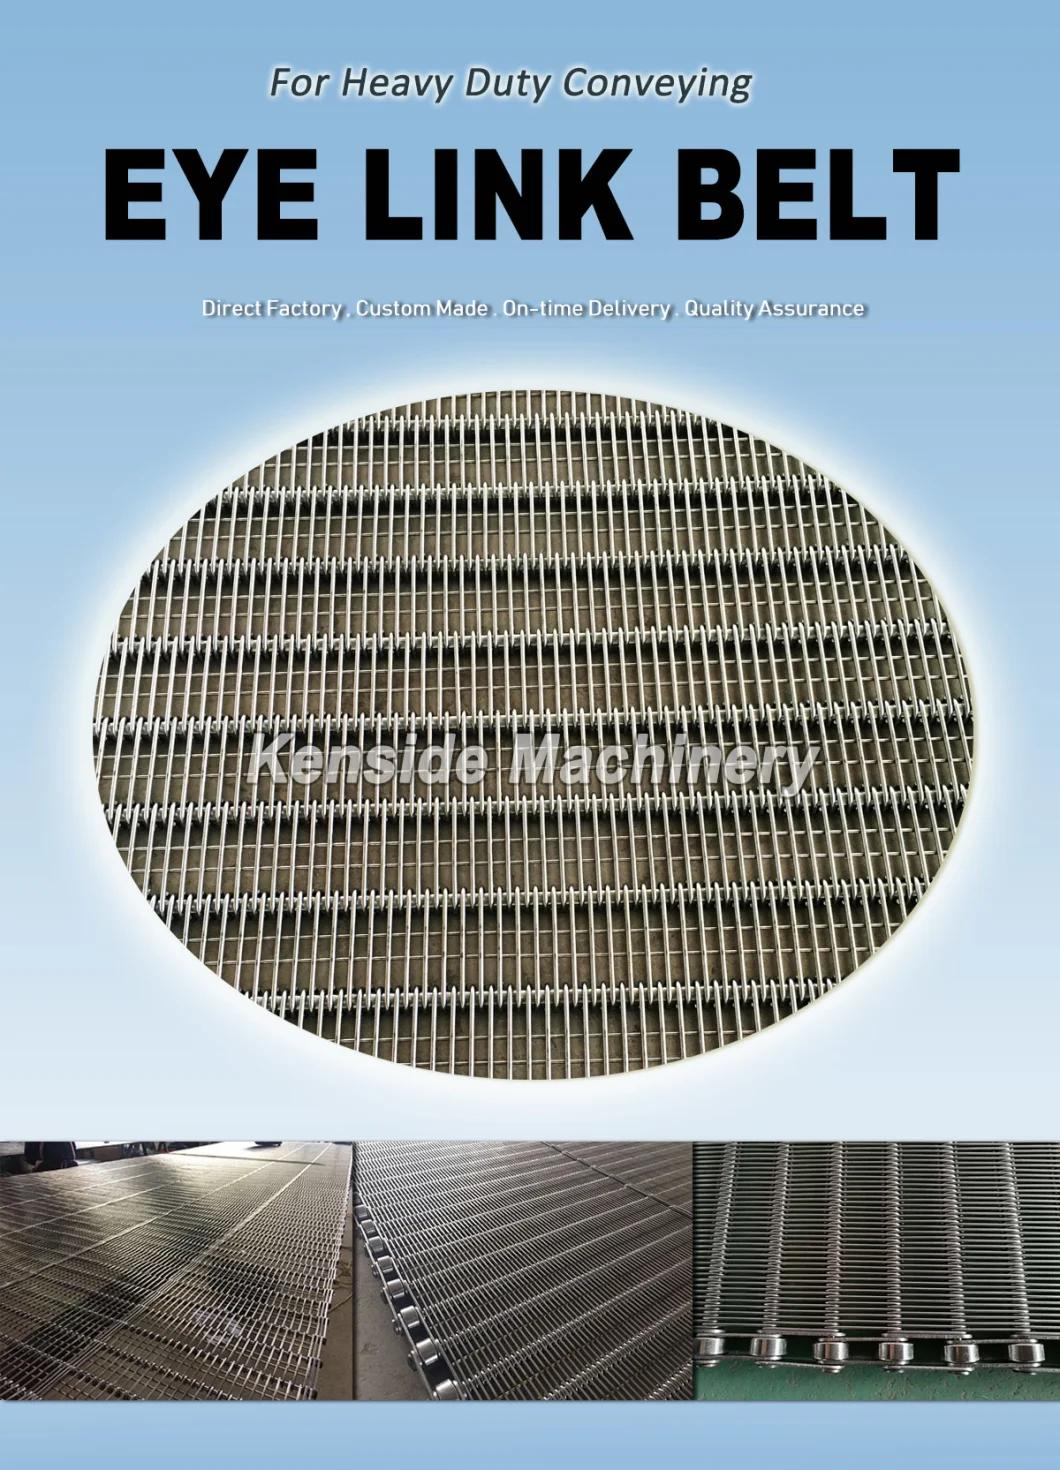 Stainless Steel Eye Link Belt for Elevating Seafood